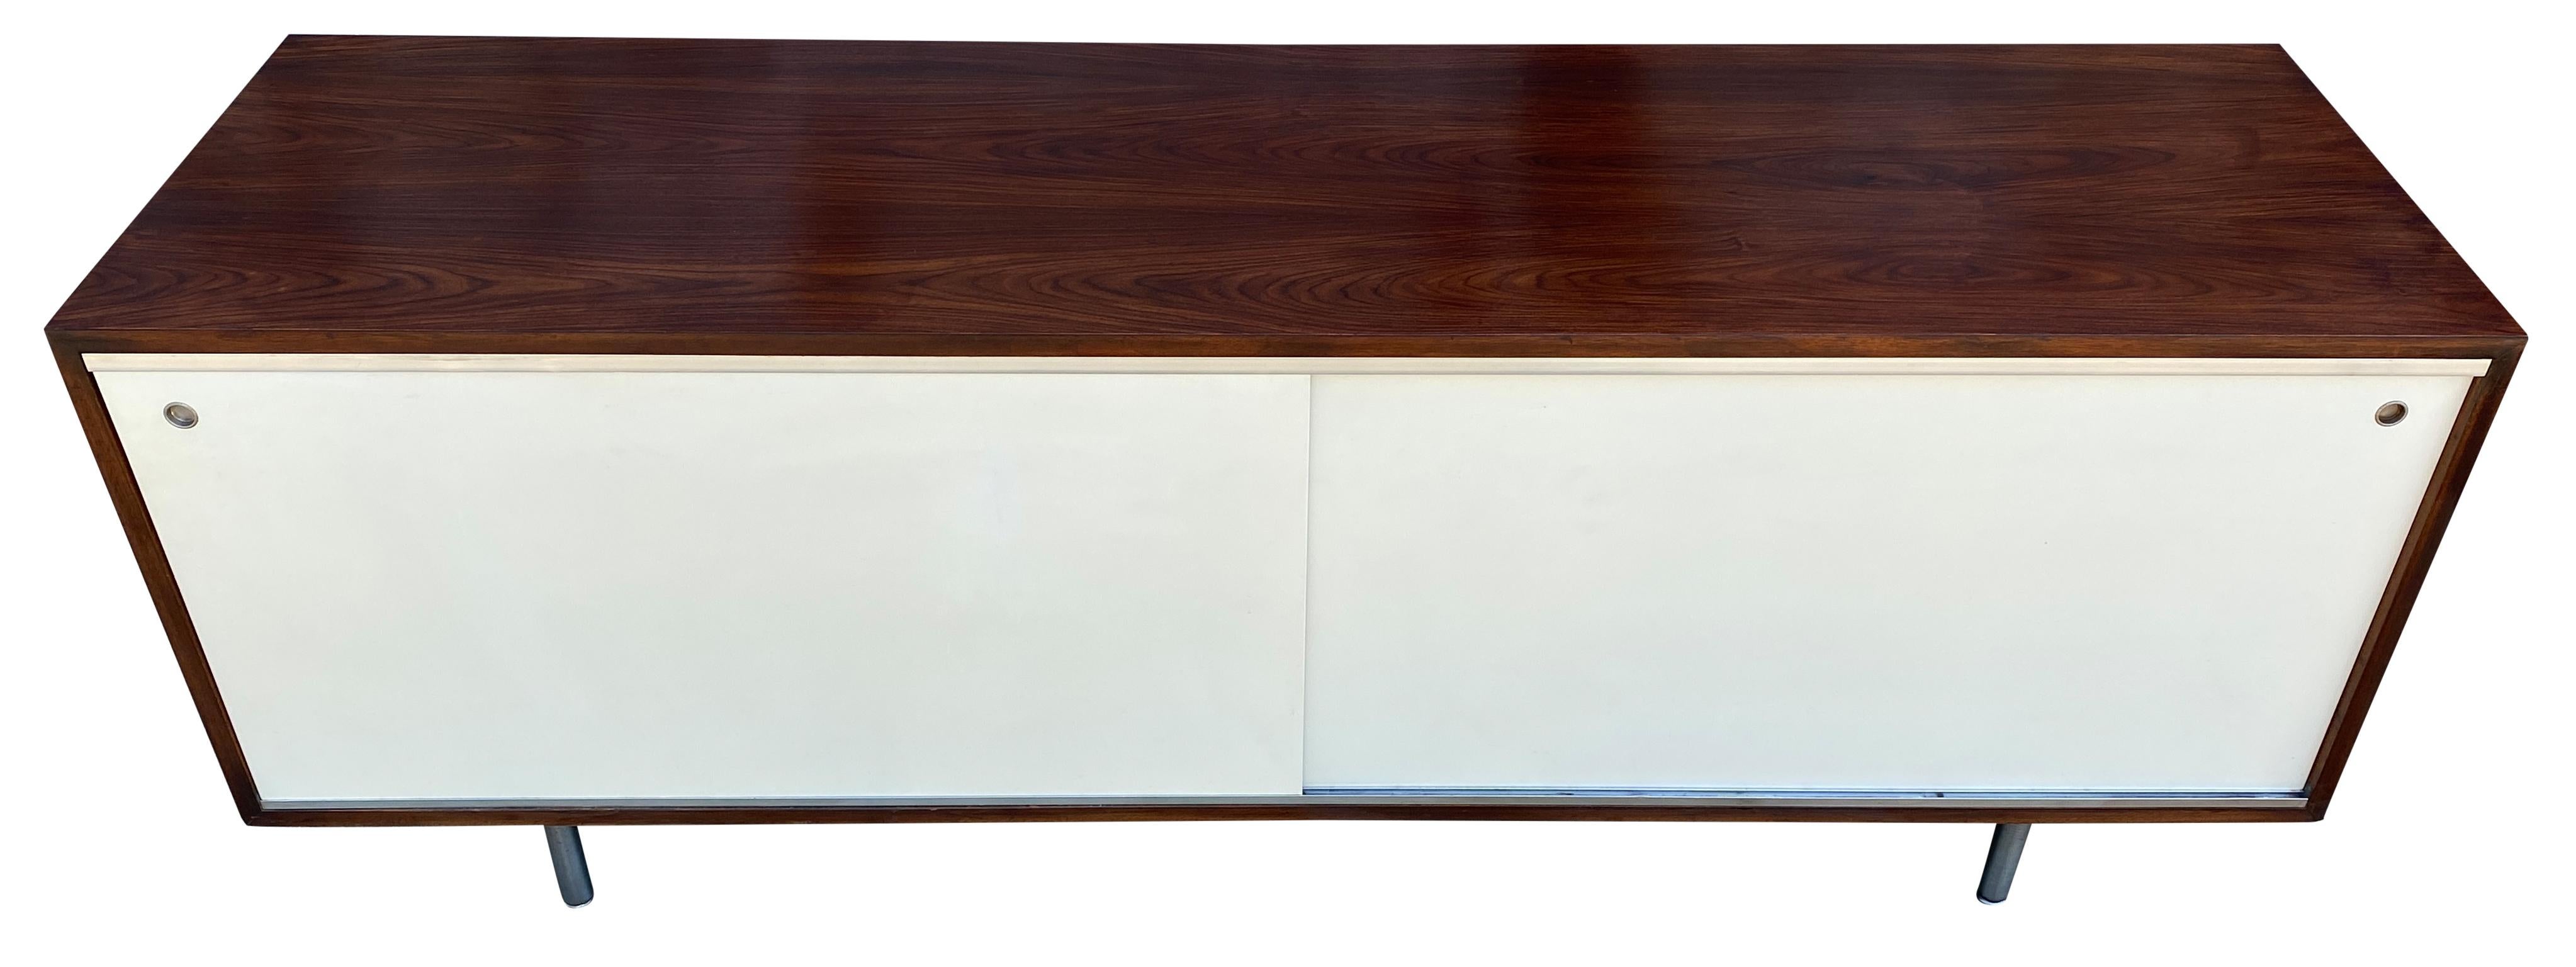 Wonderful low cabinet by Herman Miller designed by George Nelson #5803. This beautiful dark walnut low credenza features 2x front original white sliding doors with 4 sections inside and (2) adjustable shelves total with (1) slide out shelf on tracks